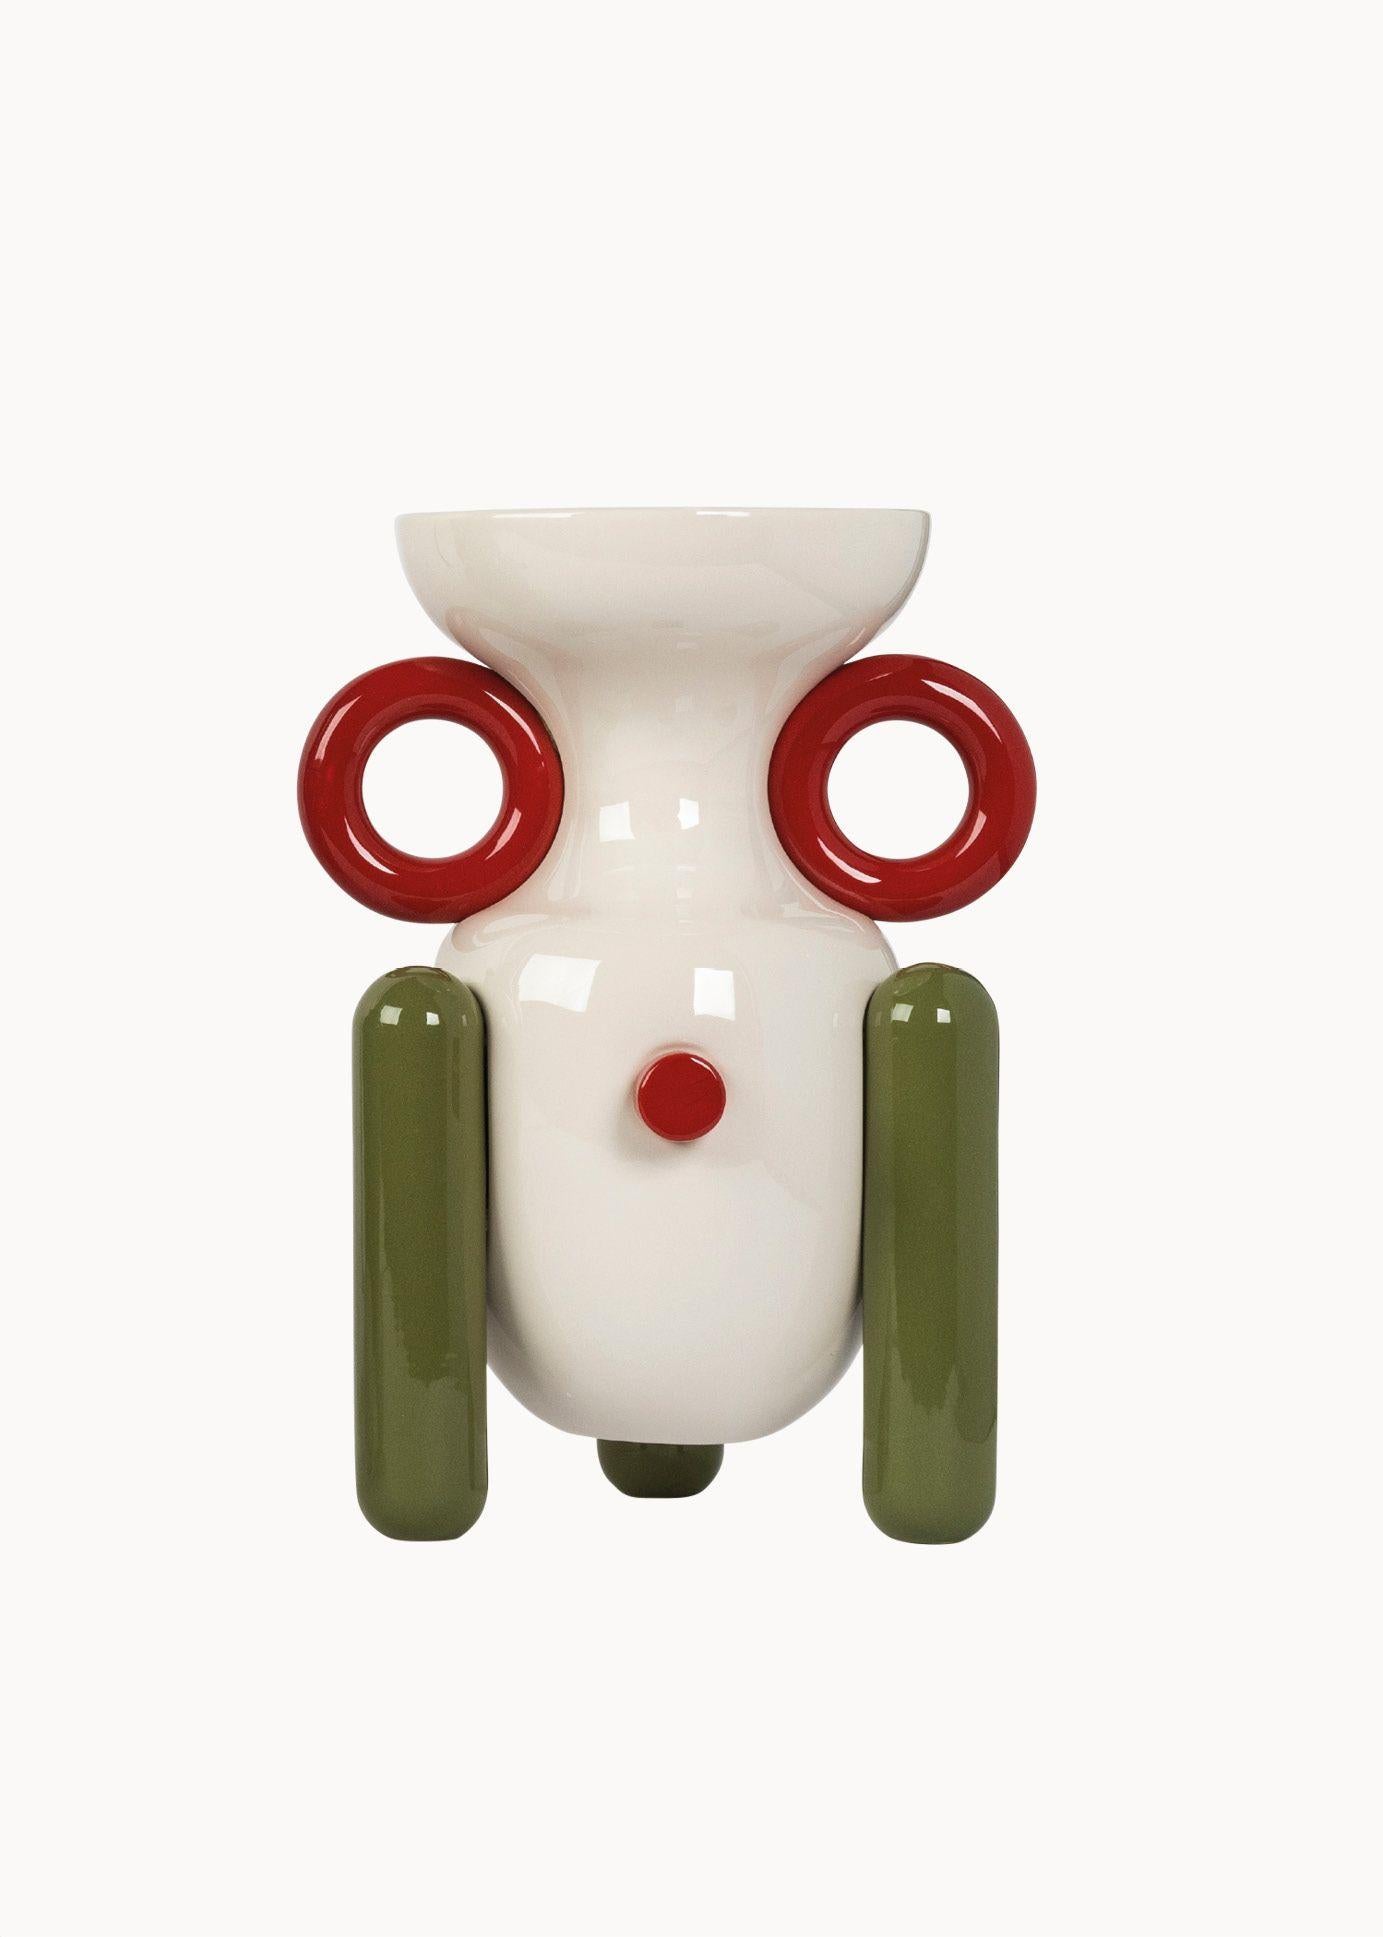 Modern Set of 3 Contemporary Glazed Ceramic Vases, Explorer Collection by Jaime Hayon For Sale